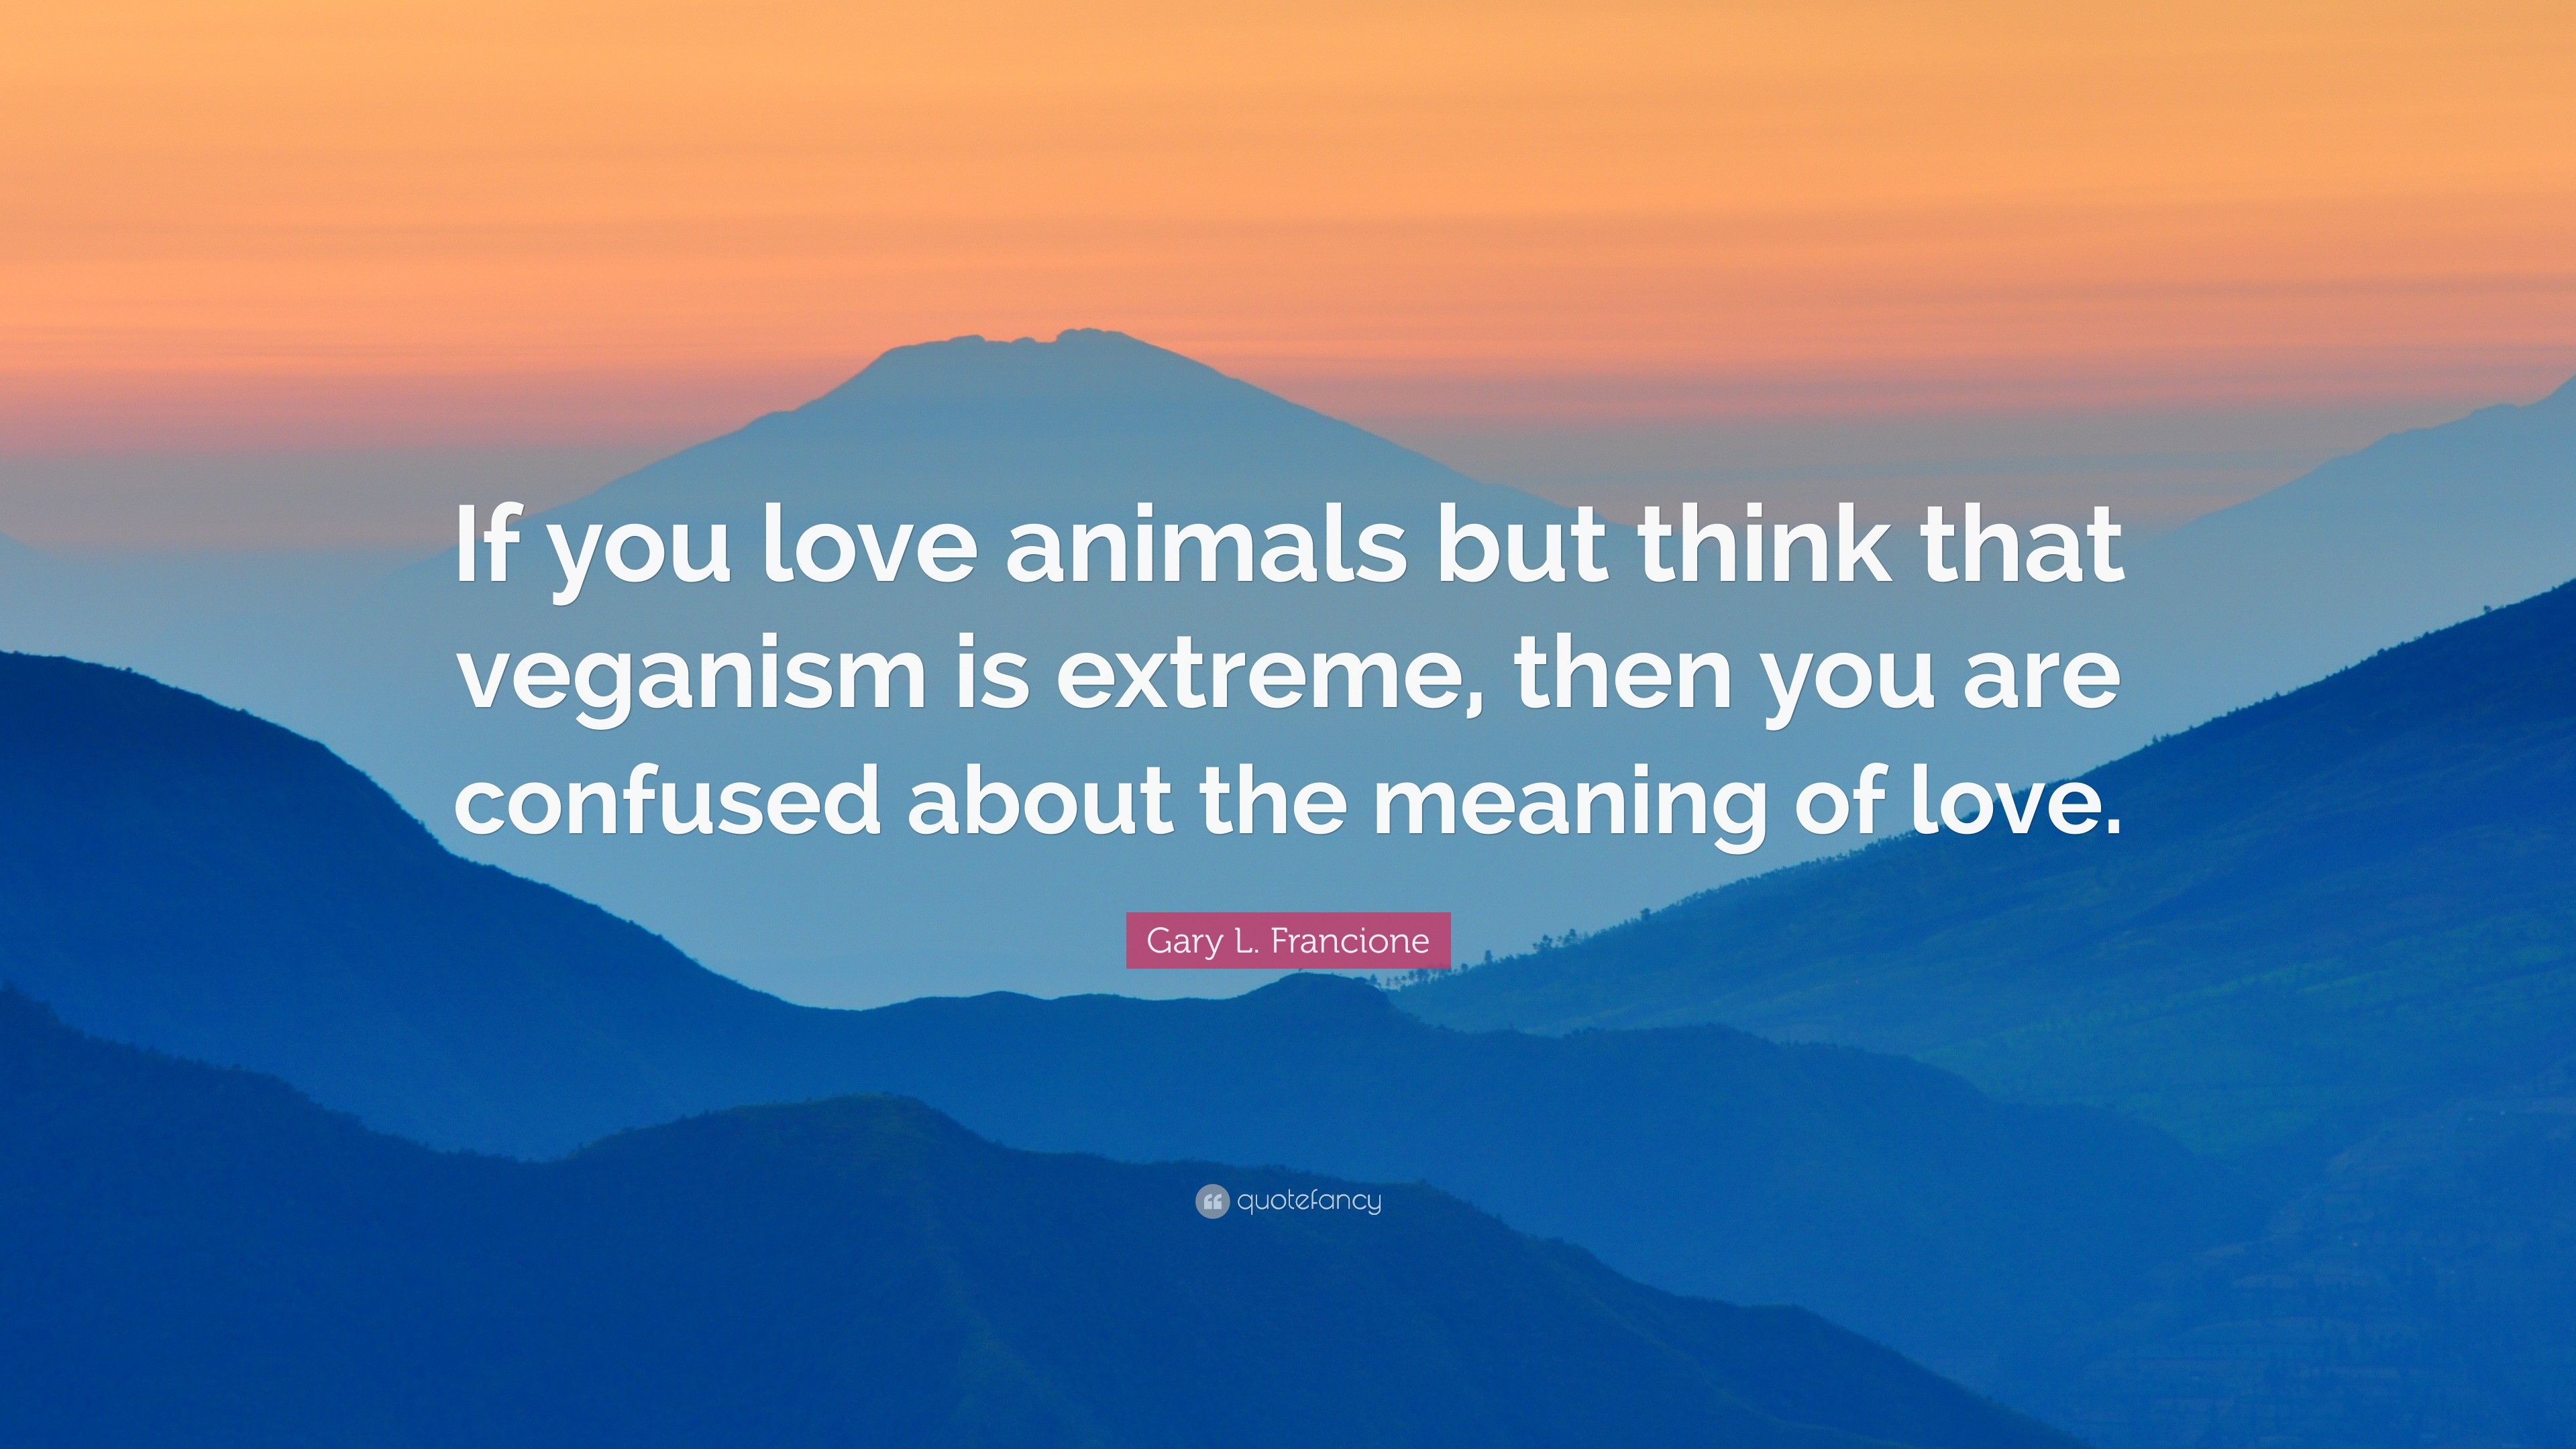 Gary L Francione Quote If You Love Animals But Think That Veganism Is Extreme Then You